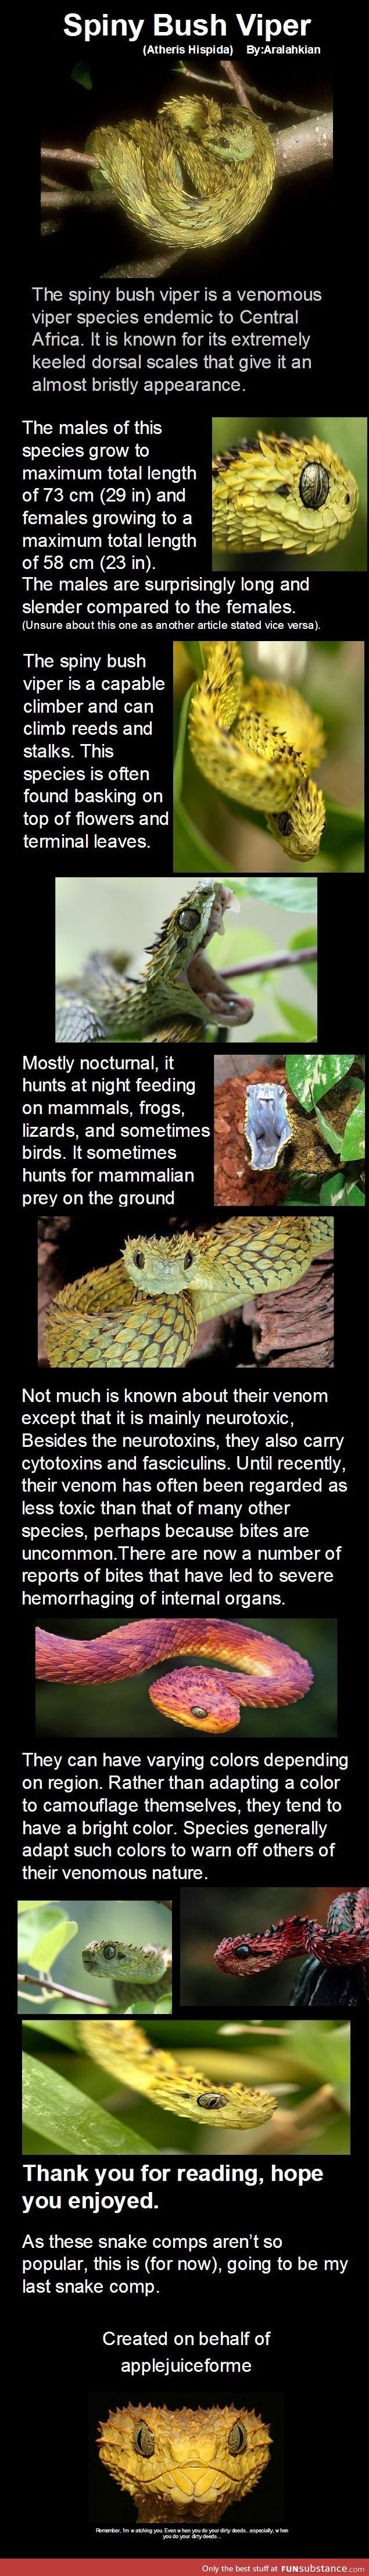 Facts about the spiny bush viper snake